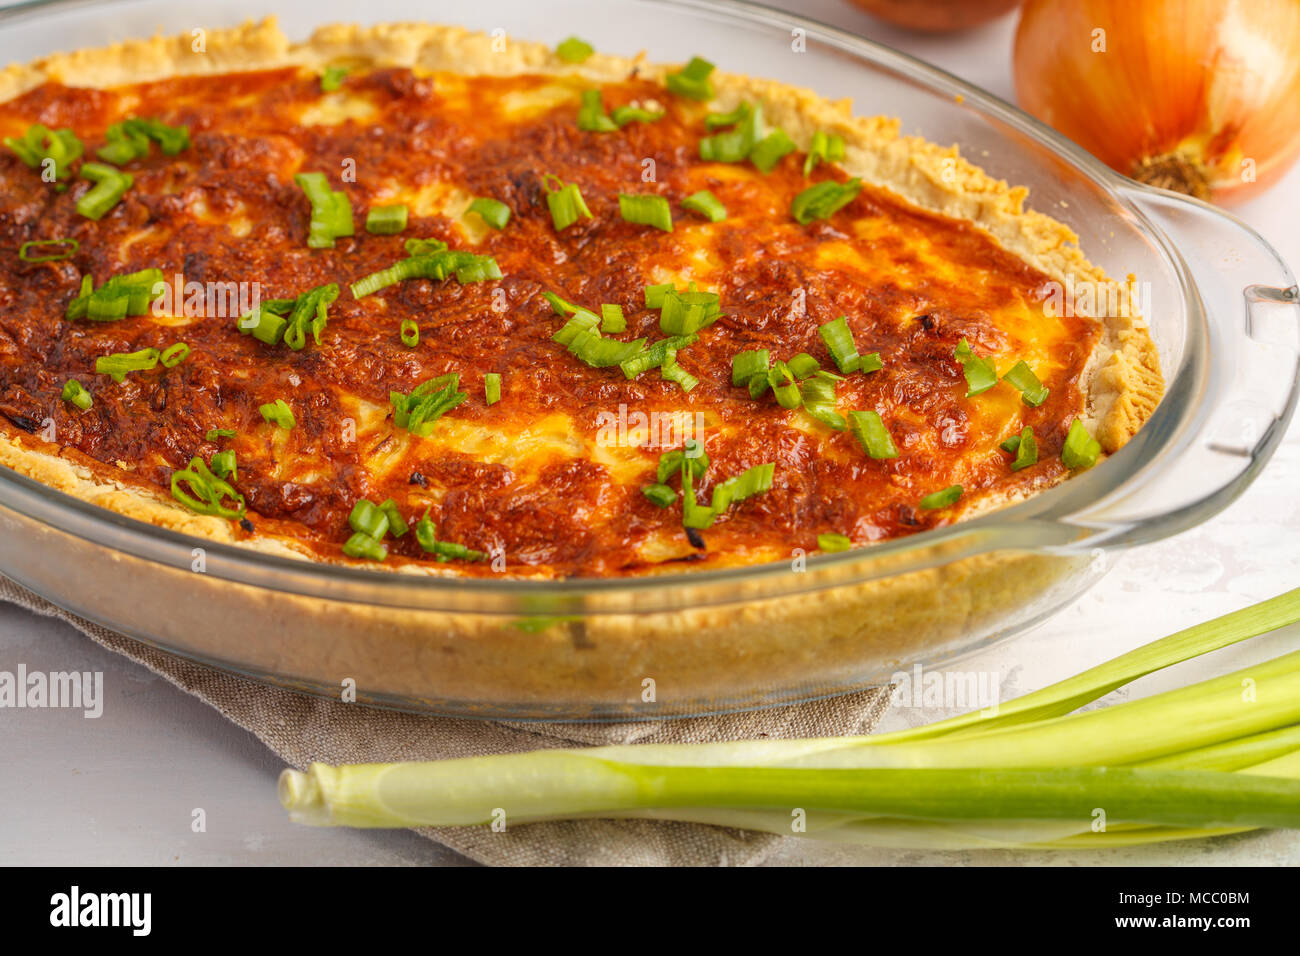 Vegetarian potato pie. Quiche lorraine with potatoes, cheese and eggs in a glass oven dish. Stock Photo